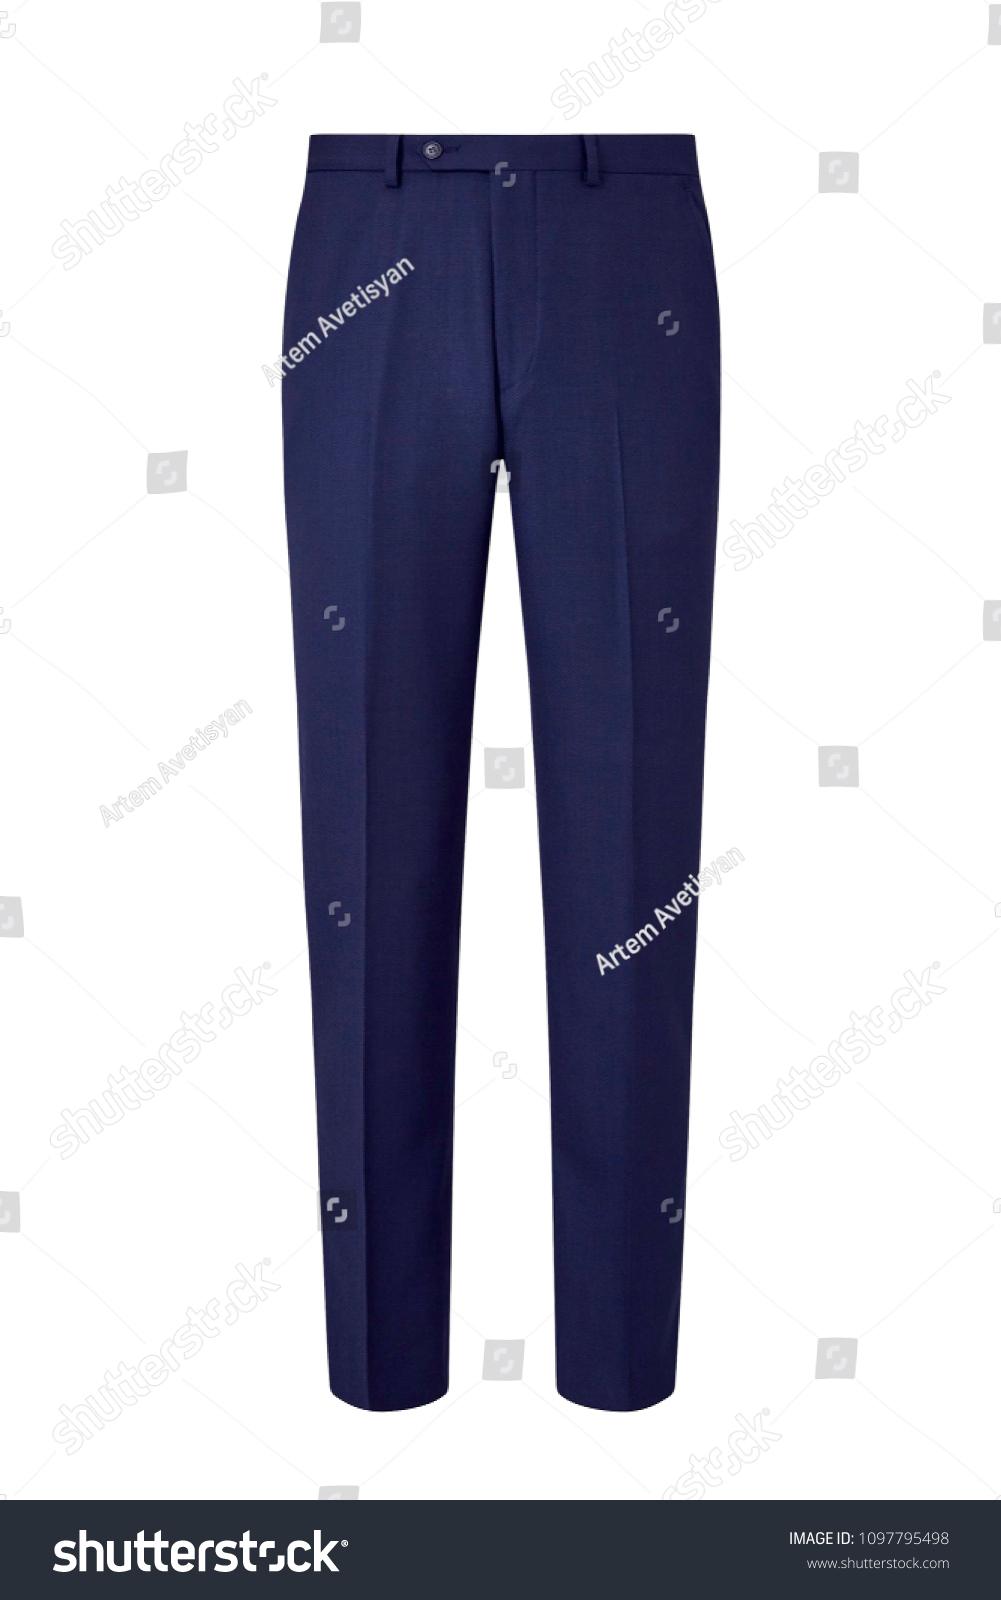 Navy Blue Formal Mens Trousers Isolated Stock Photo 1097795498 ...